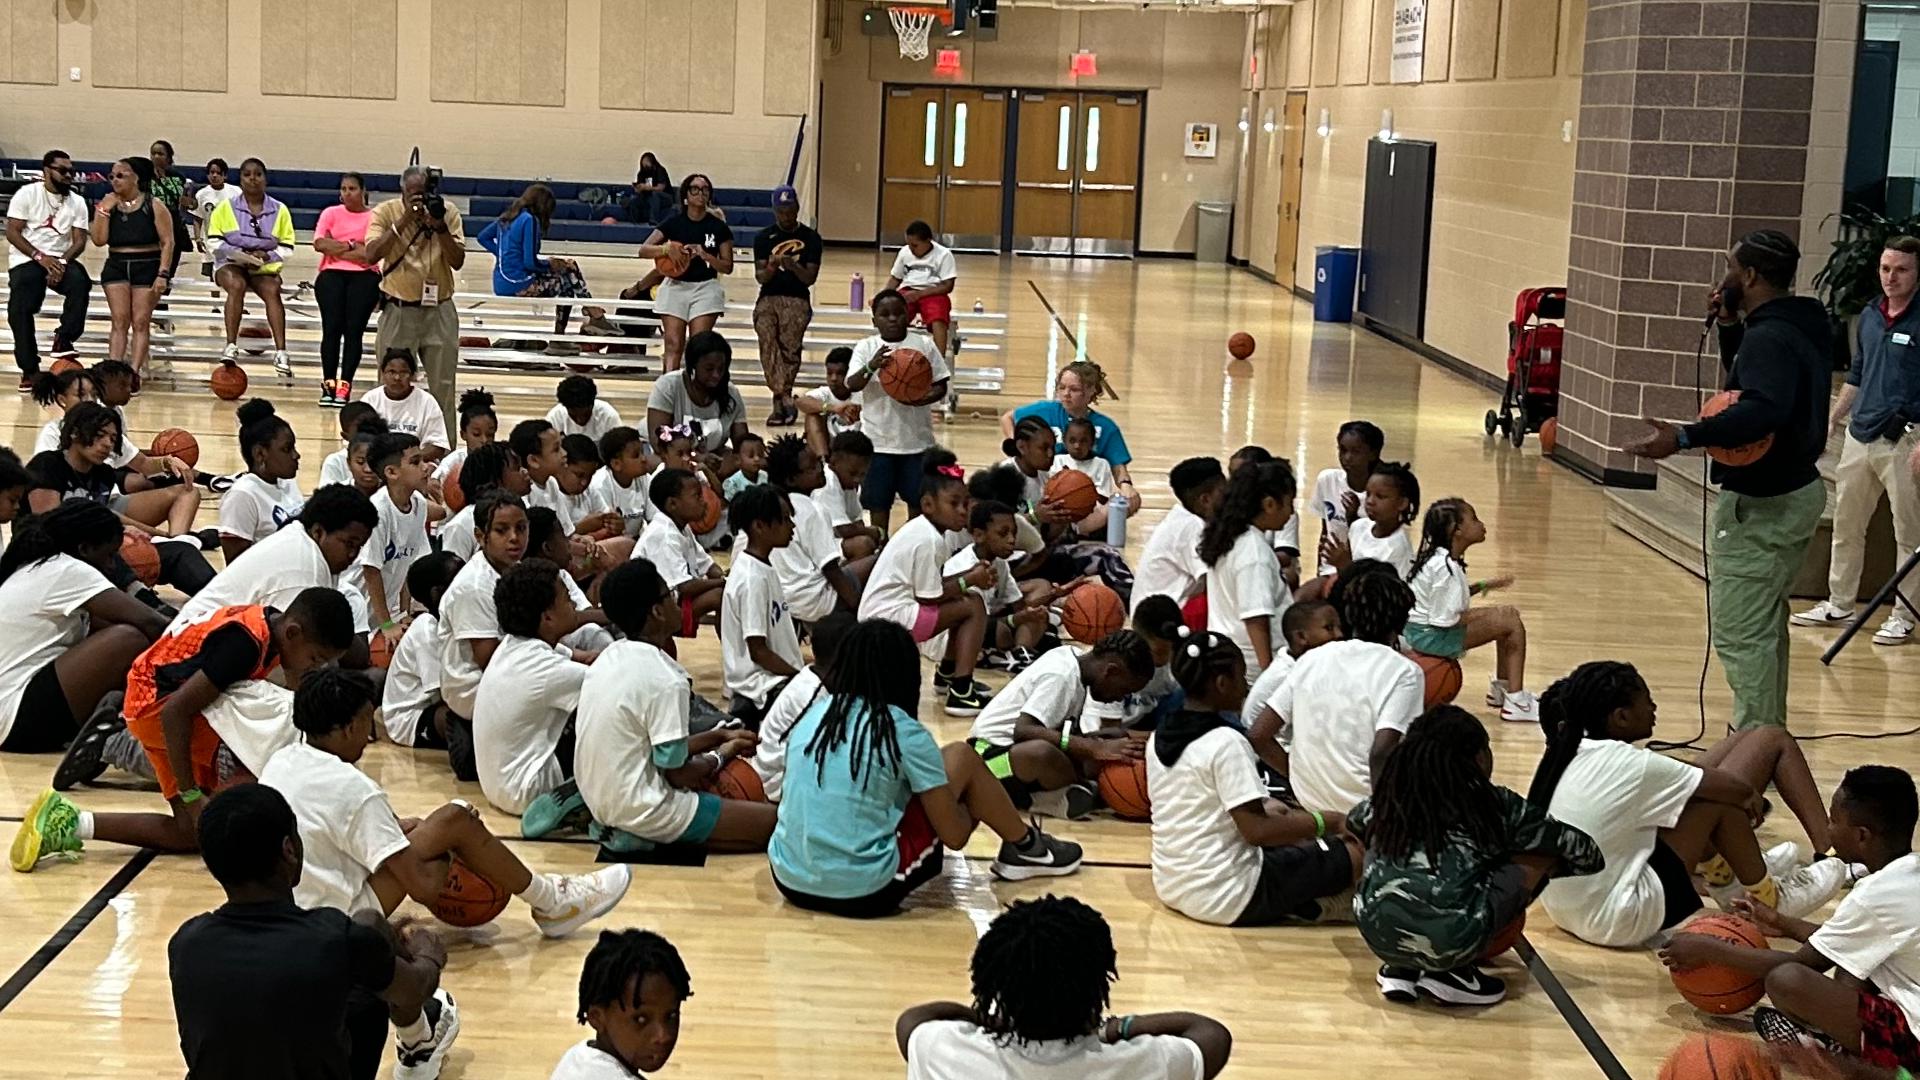 Former Washington Wizards prospect, Brandon Johnson, told campers his story of being a child with an incarcerated parent and being an incarcerated parent himself